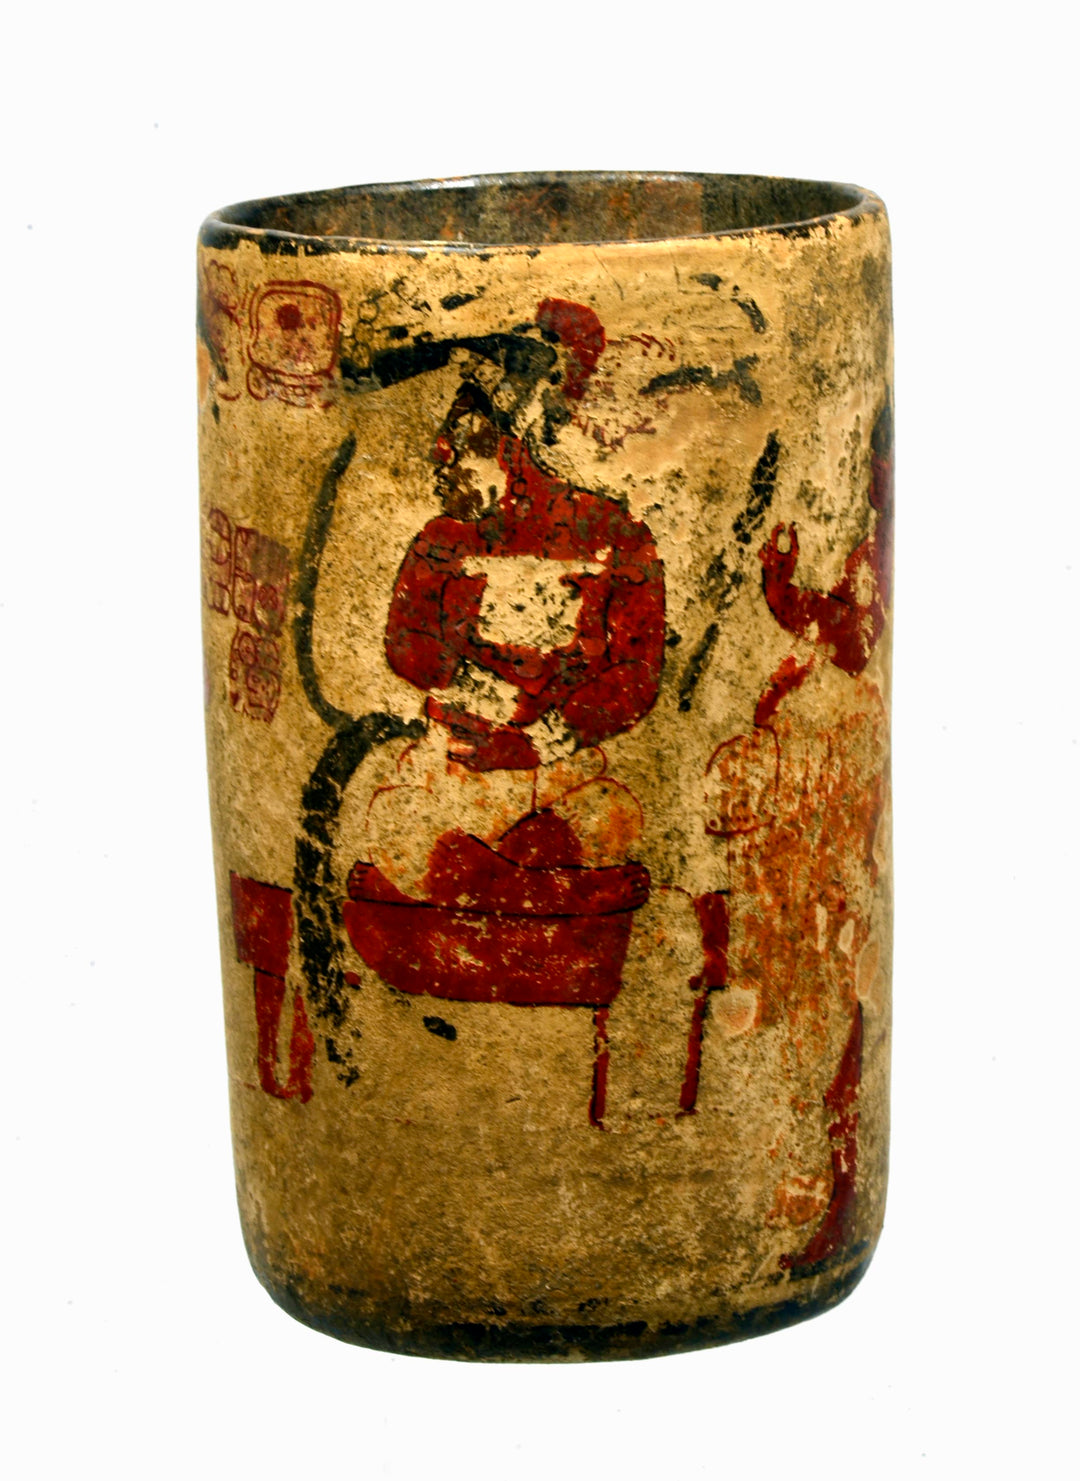 Maya  Polychrome Pottery IK site Cylinder Vessel by the Master of the Pink Glyphs A